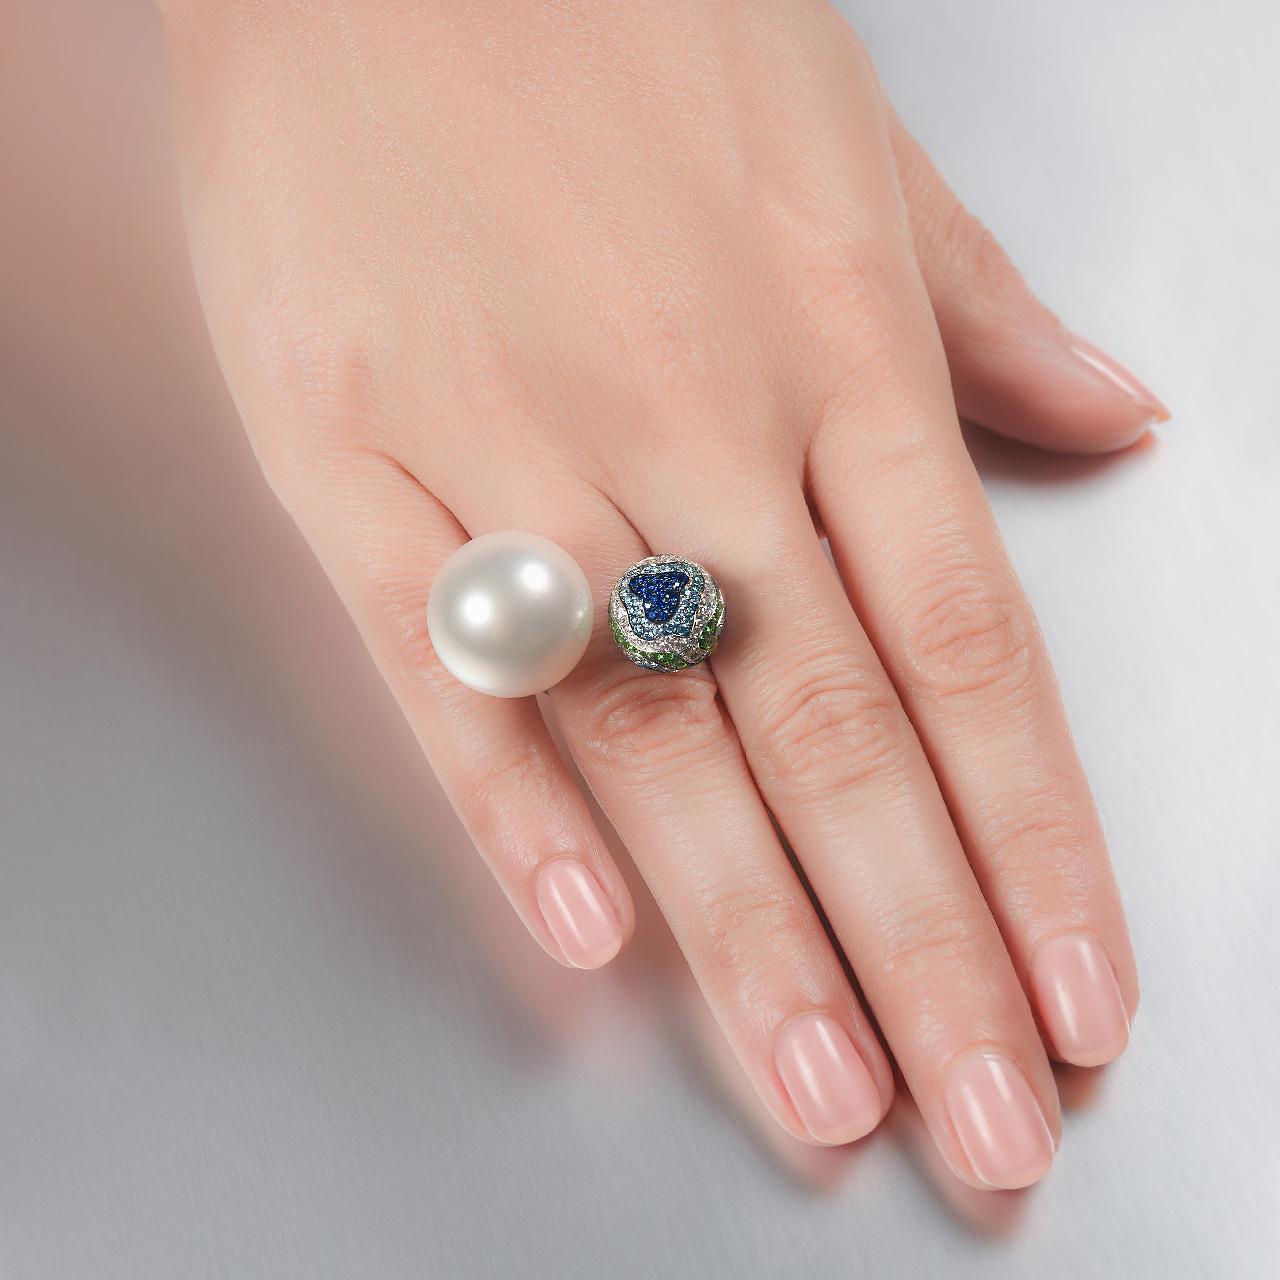 Women's 18 K White Gold White South Sea Pearl, Diamonds, Sapphires and Tsavorites Ring For Sale